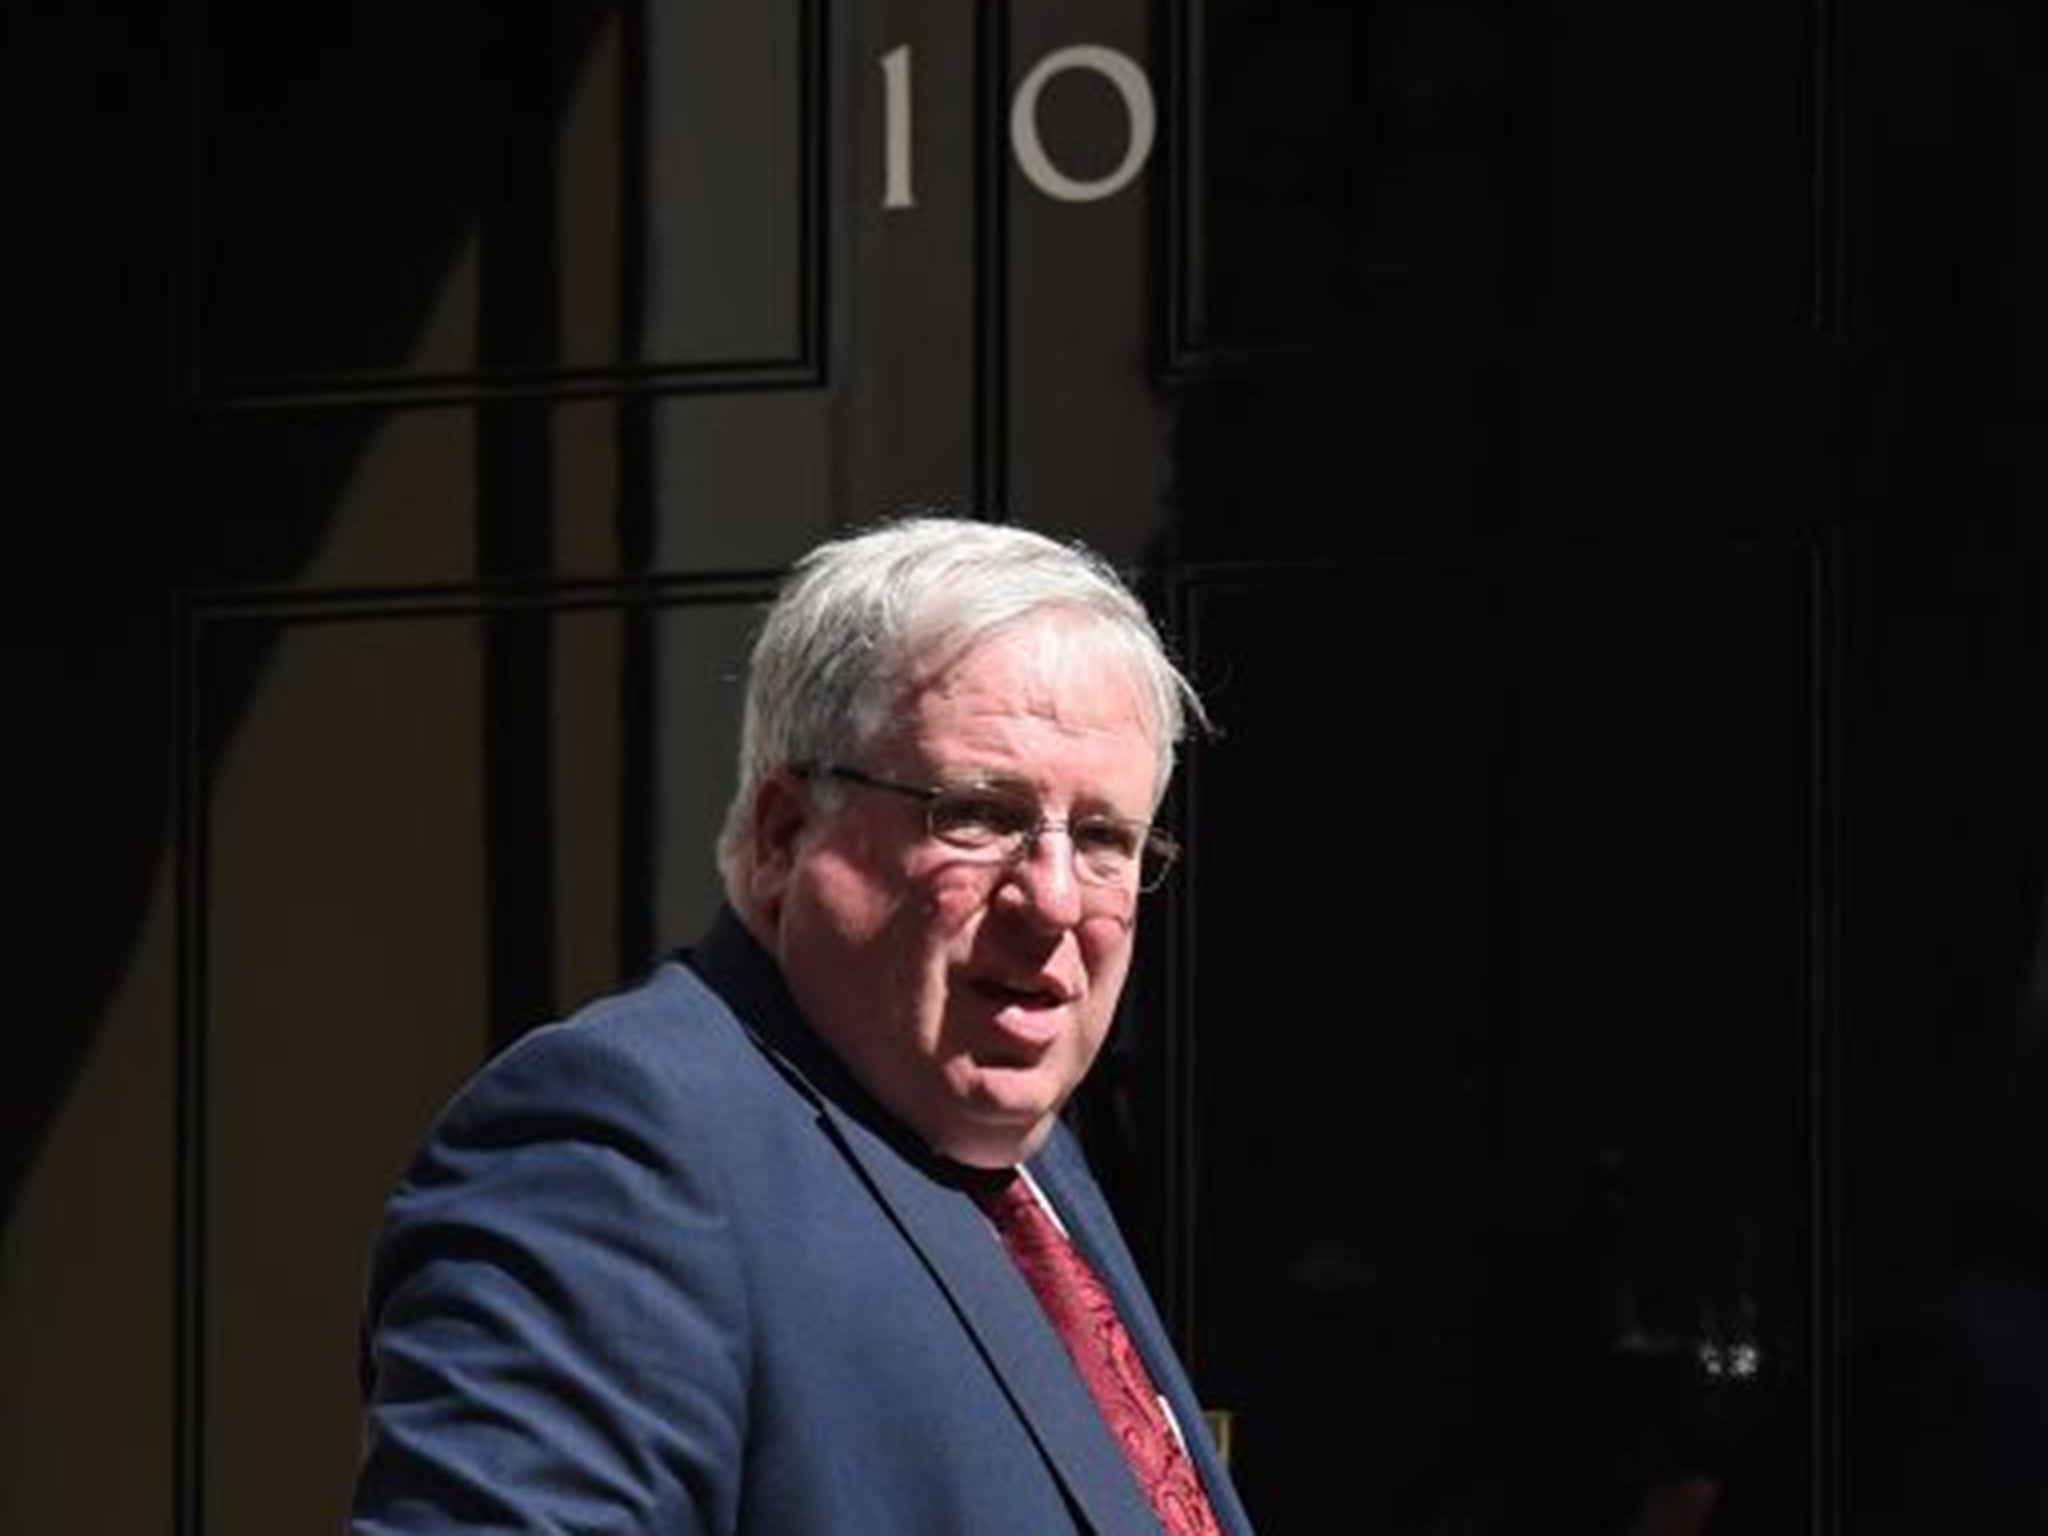 Patrick McLoughlin, the UK Transport Minister, has called for the European Commission to investigate vehicle emissions